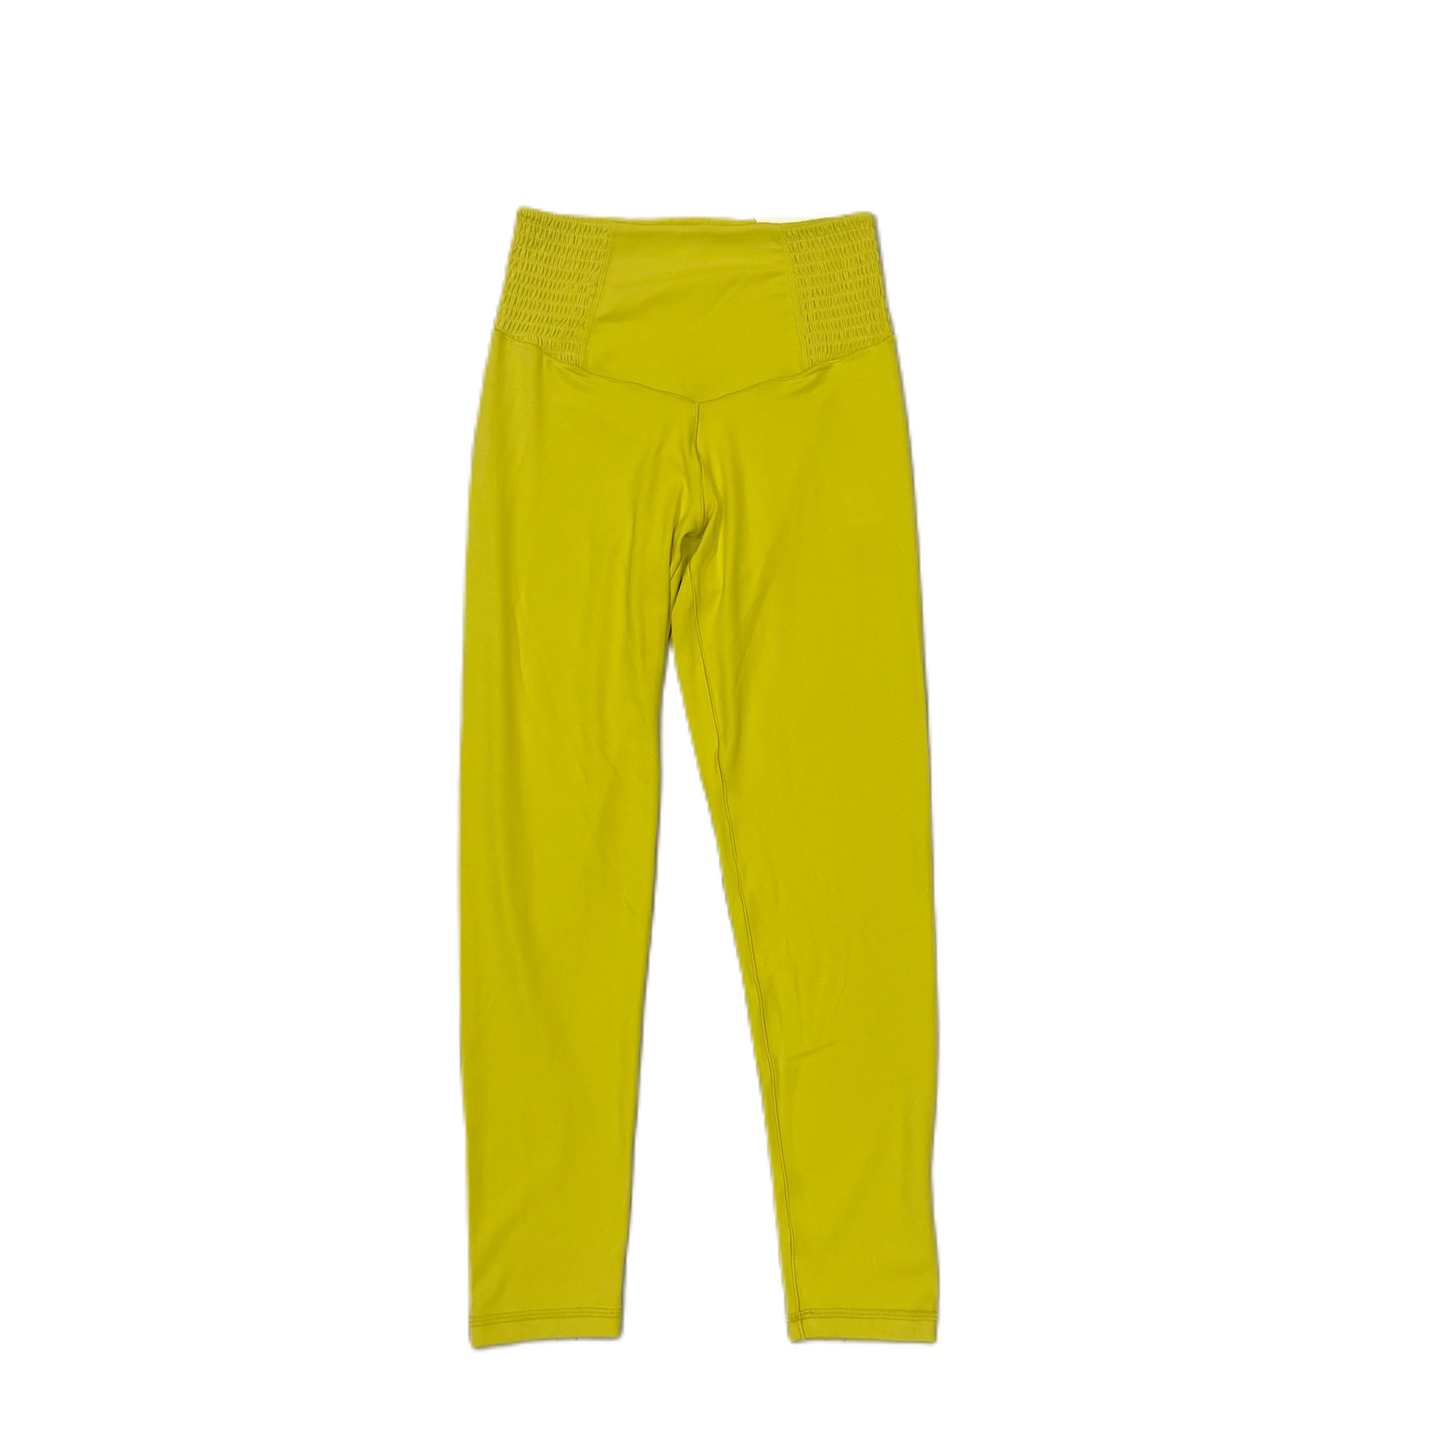 Chartreuse Athletic Leggings By Aerie, Size: M